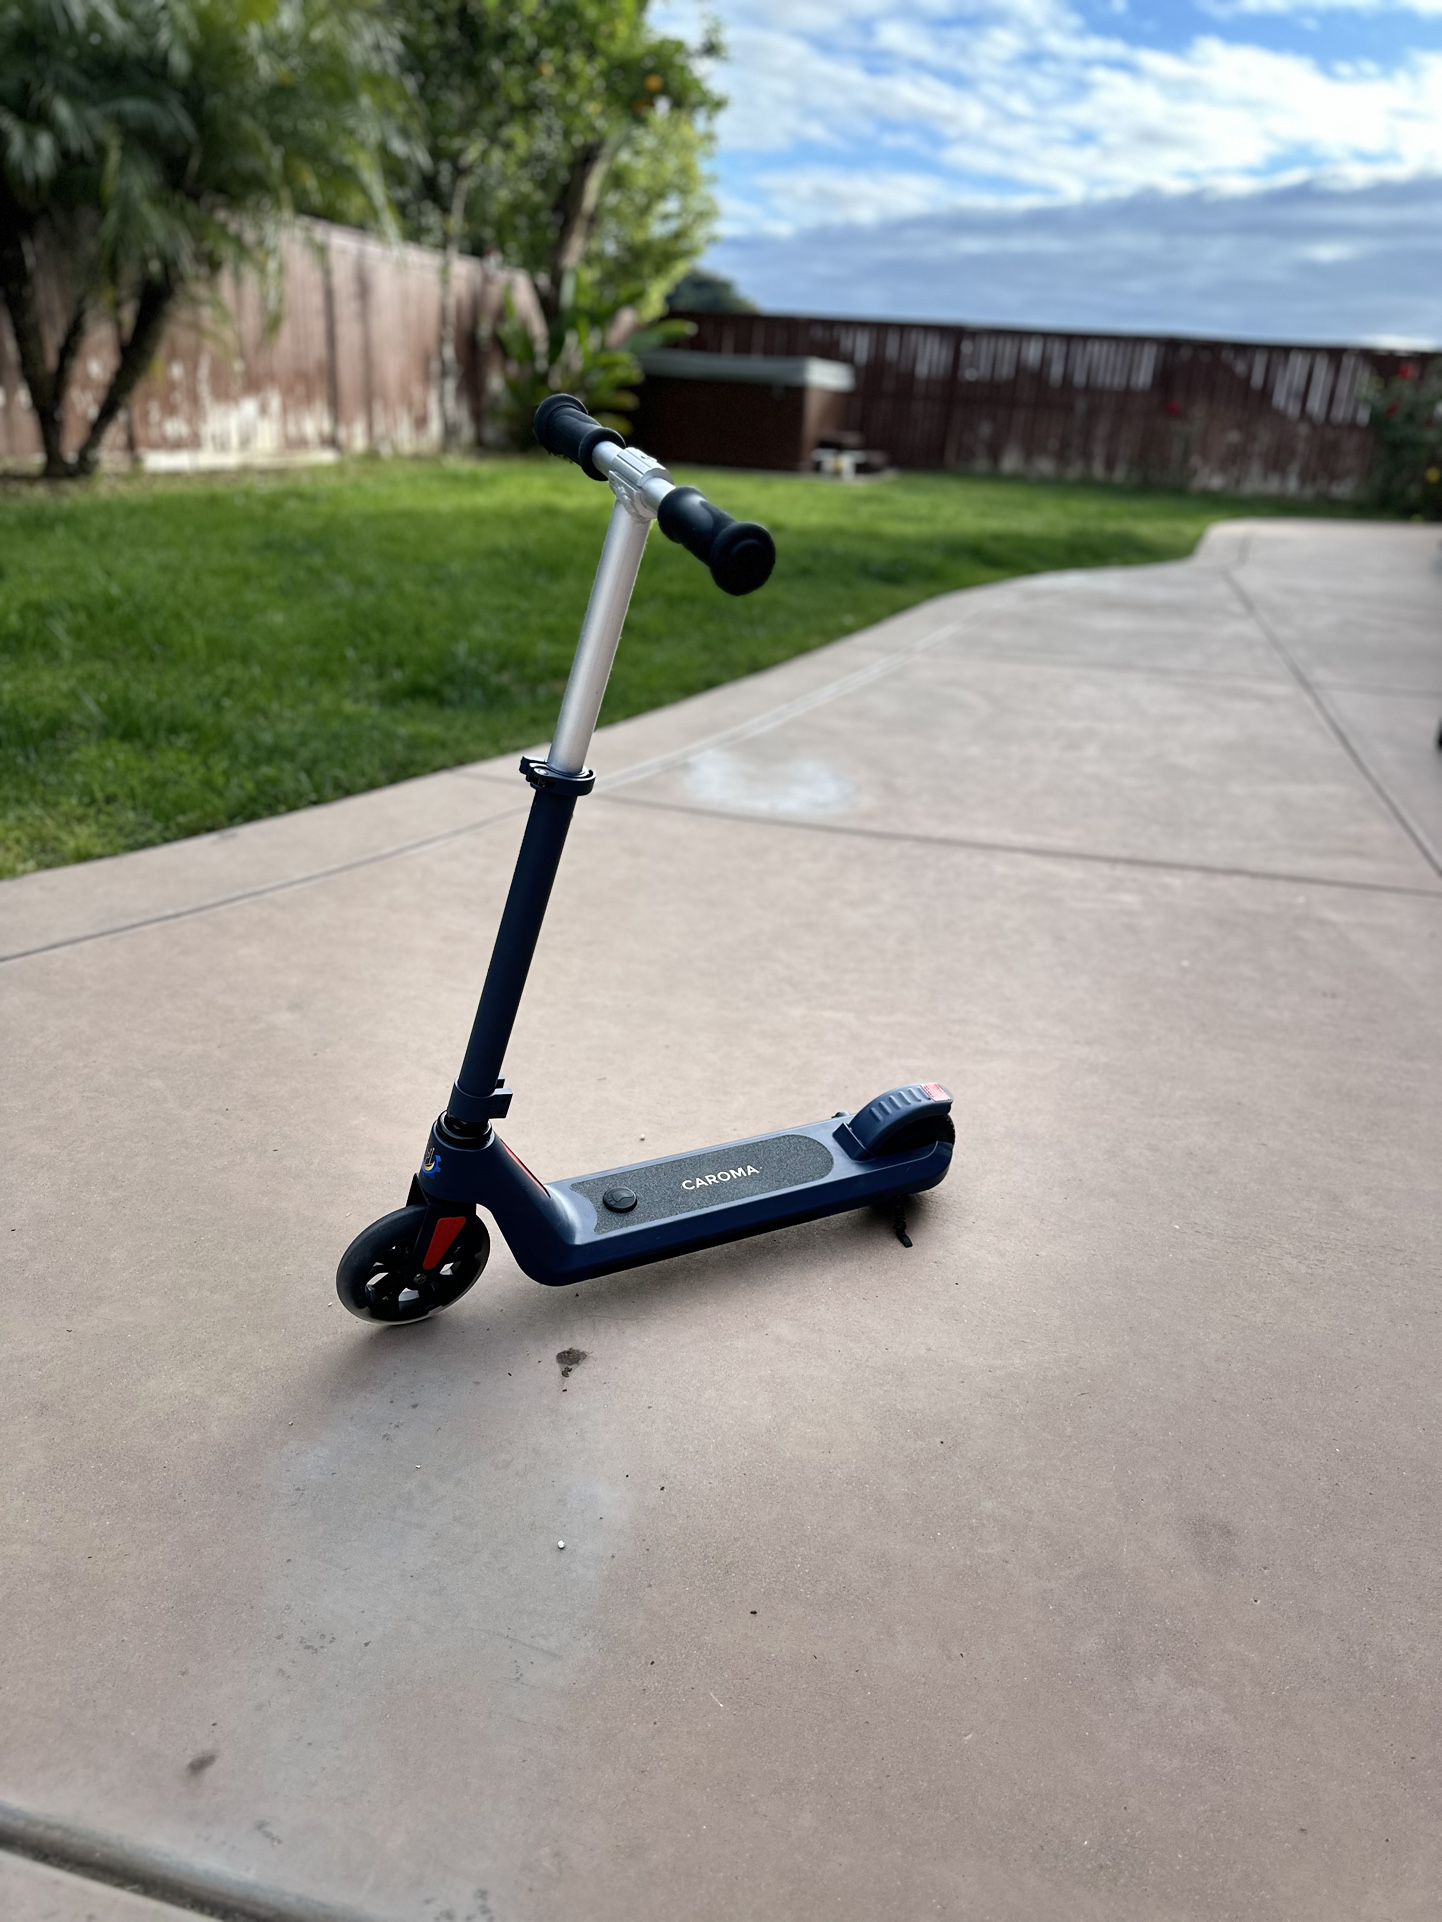 Kids Electric Scooter